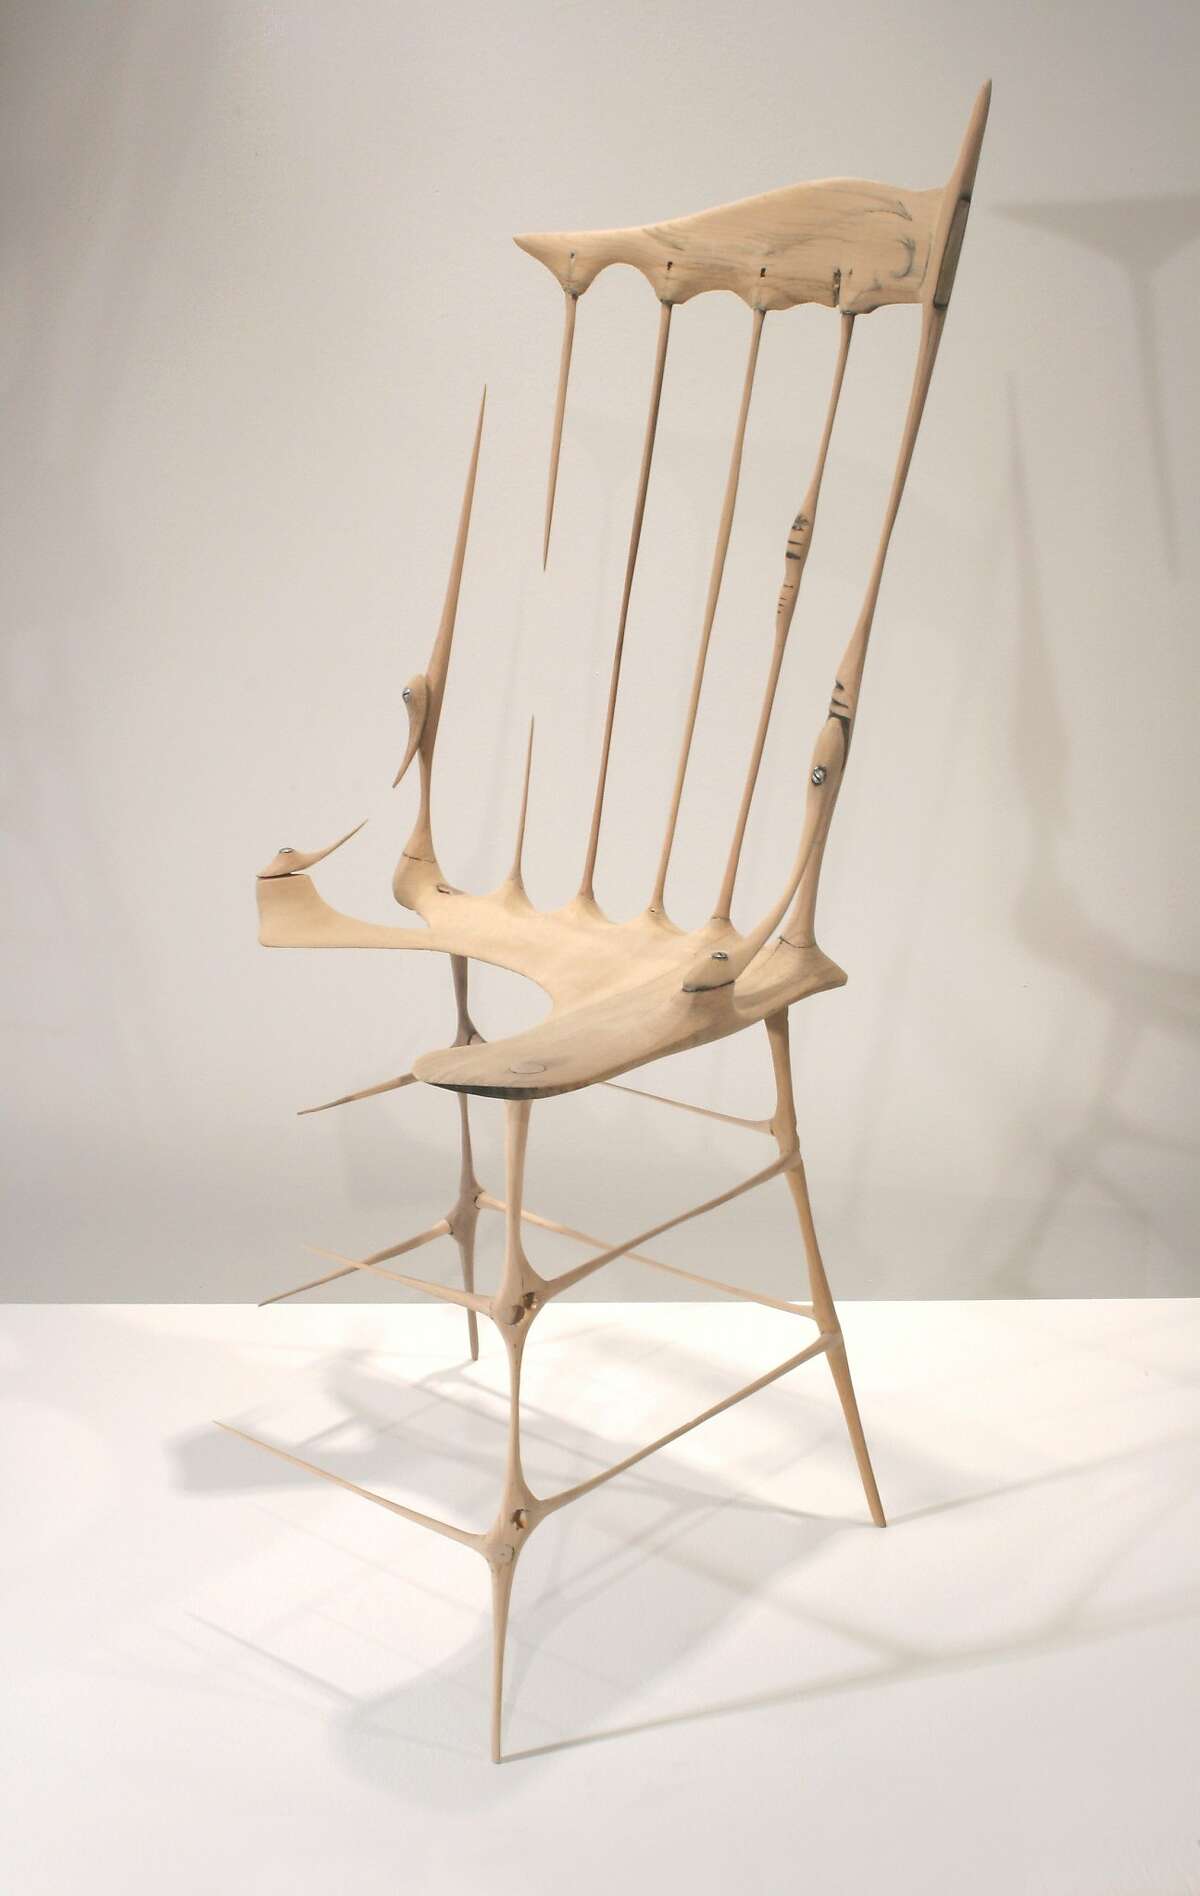 Drew Daly, "Remnant," (2004-05). Sanded oak chair, 36 x 14 x 15 inches. On view in "Obsessive Reductive" at San Francisco's Museum of Craft and Design.